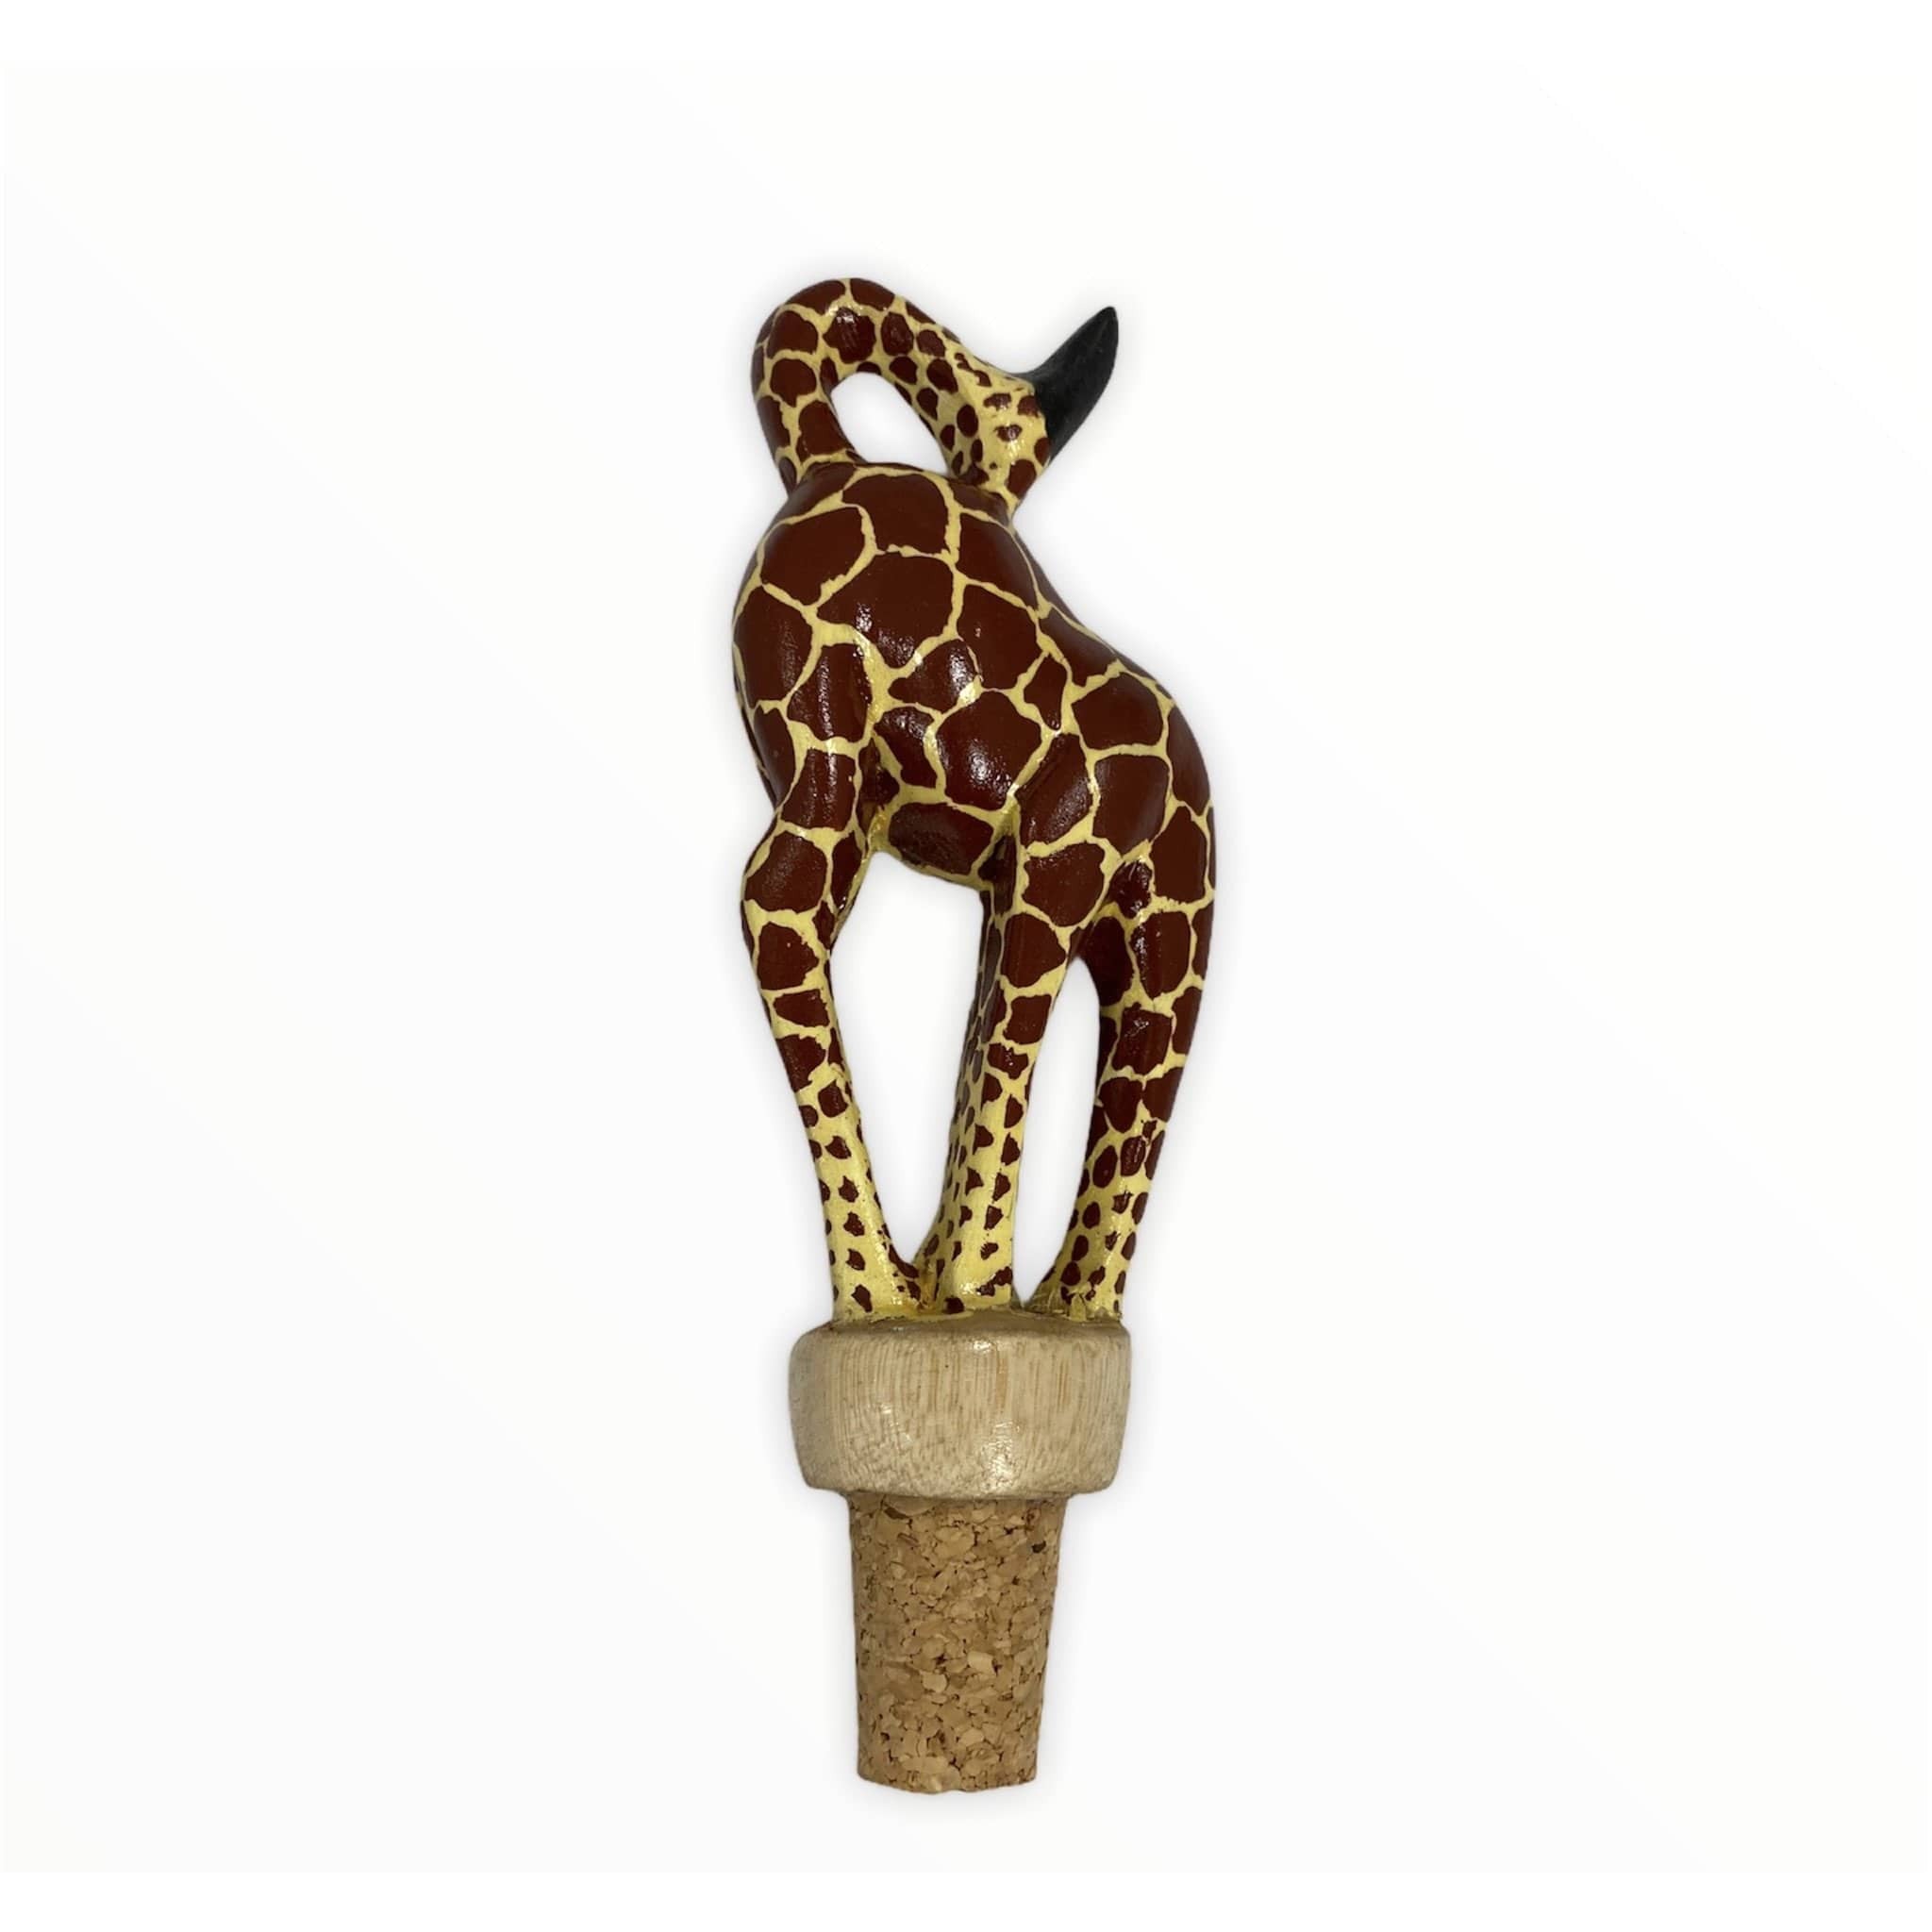 Tobmarc Home Decor & Gifts  Giraffe Large Animal statue Personalized wine bottle stopper